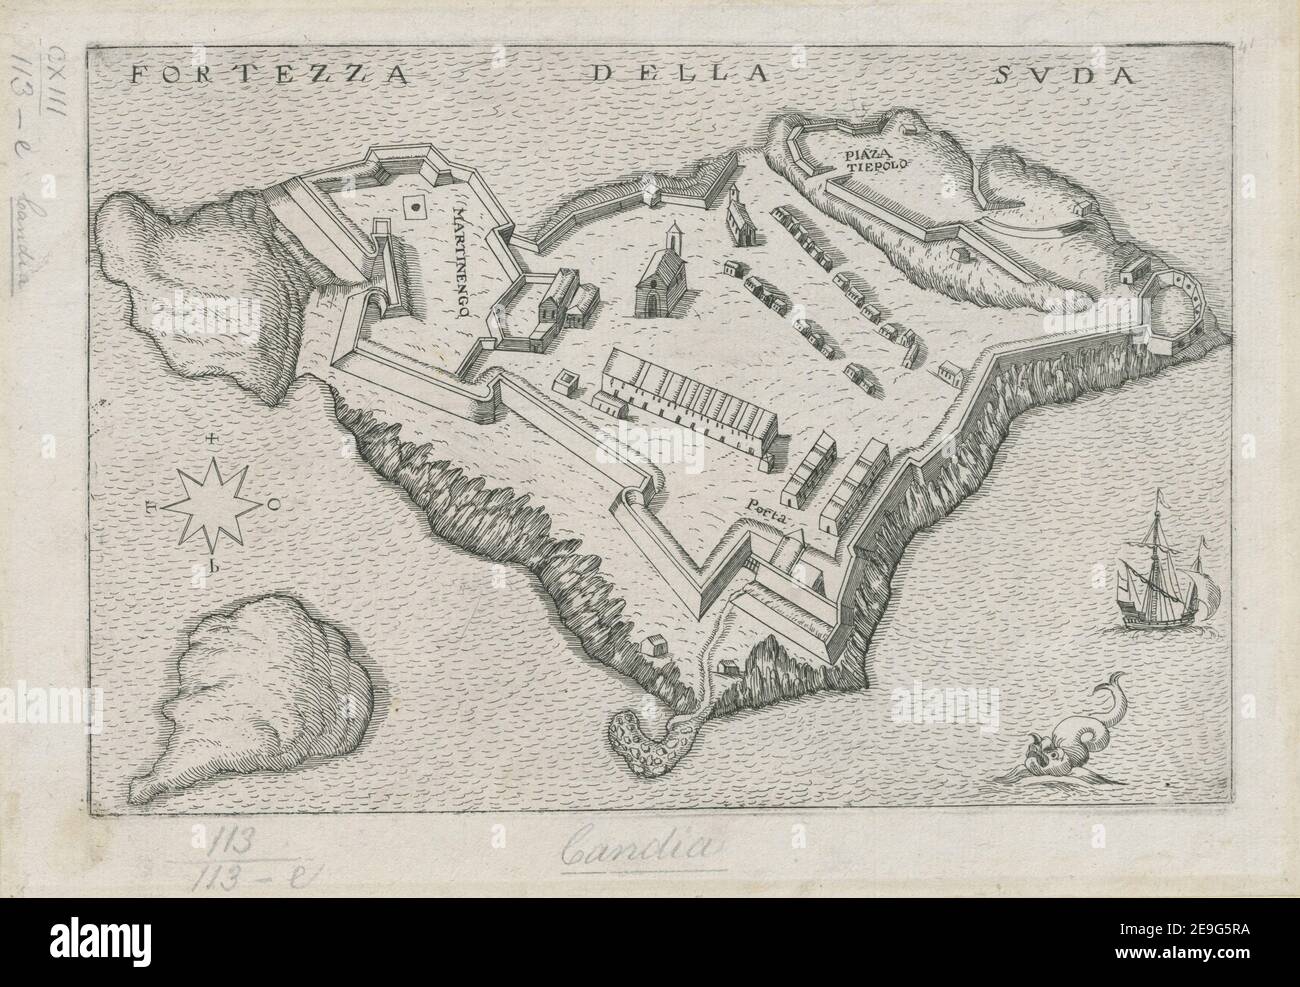 FORTEZZA DELLA SUDA. Author  Collignon, FrancÃßois 113.113.e. Place of publication: [Rome?] Publisher: [FrancÃßois Collignon?] Date of publication: [about 1669?]  Item type: 1 map Medium: copperplate engraving Dimensions: 17 x 26 cm  Former owner: George III, King of Great Britain, 1738-1820 Stock Photo